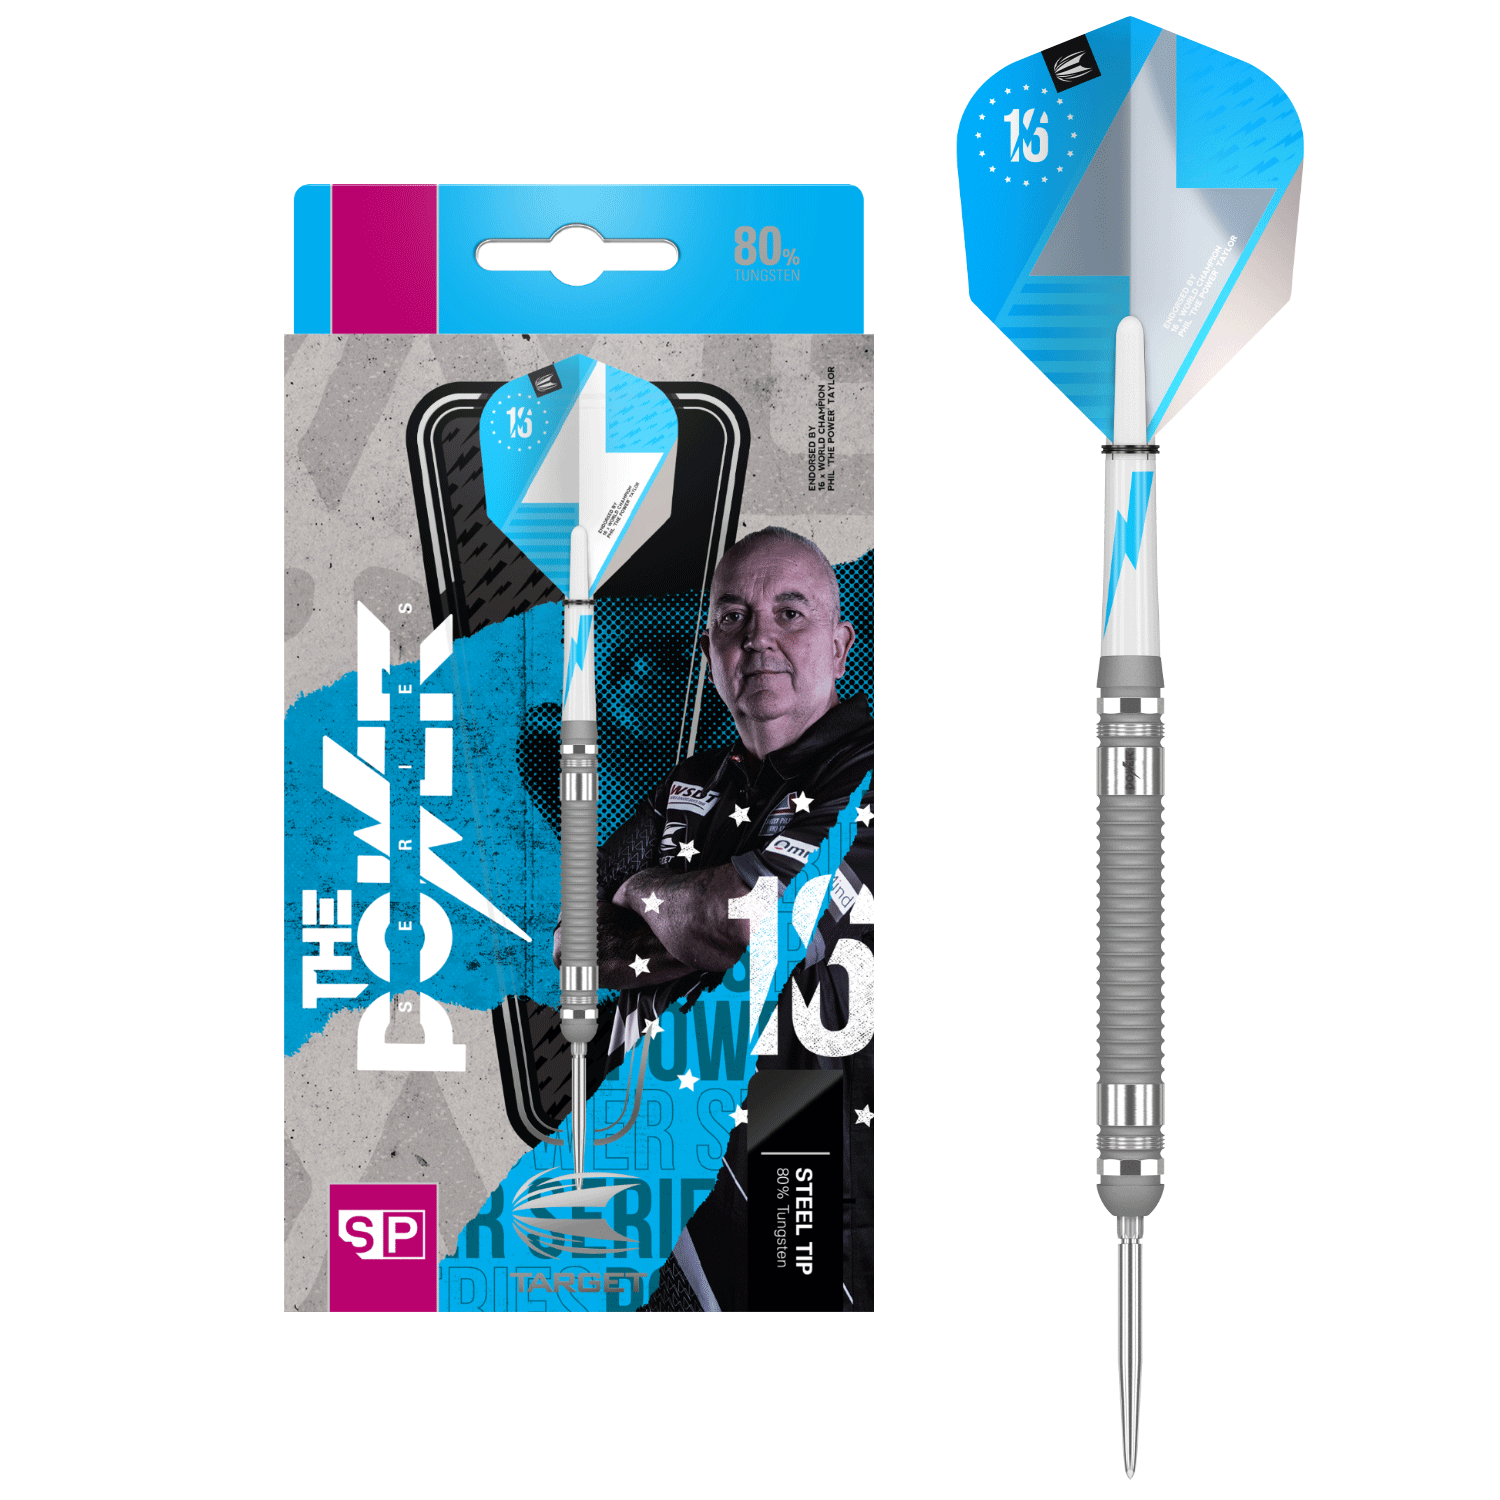 Target Phil Taylor The Power Series 80% Silver SP Steeldarts